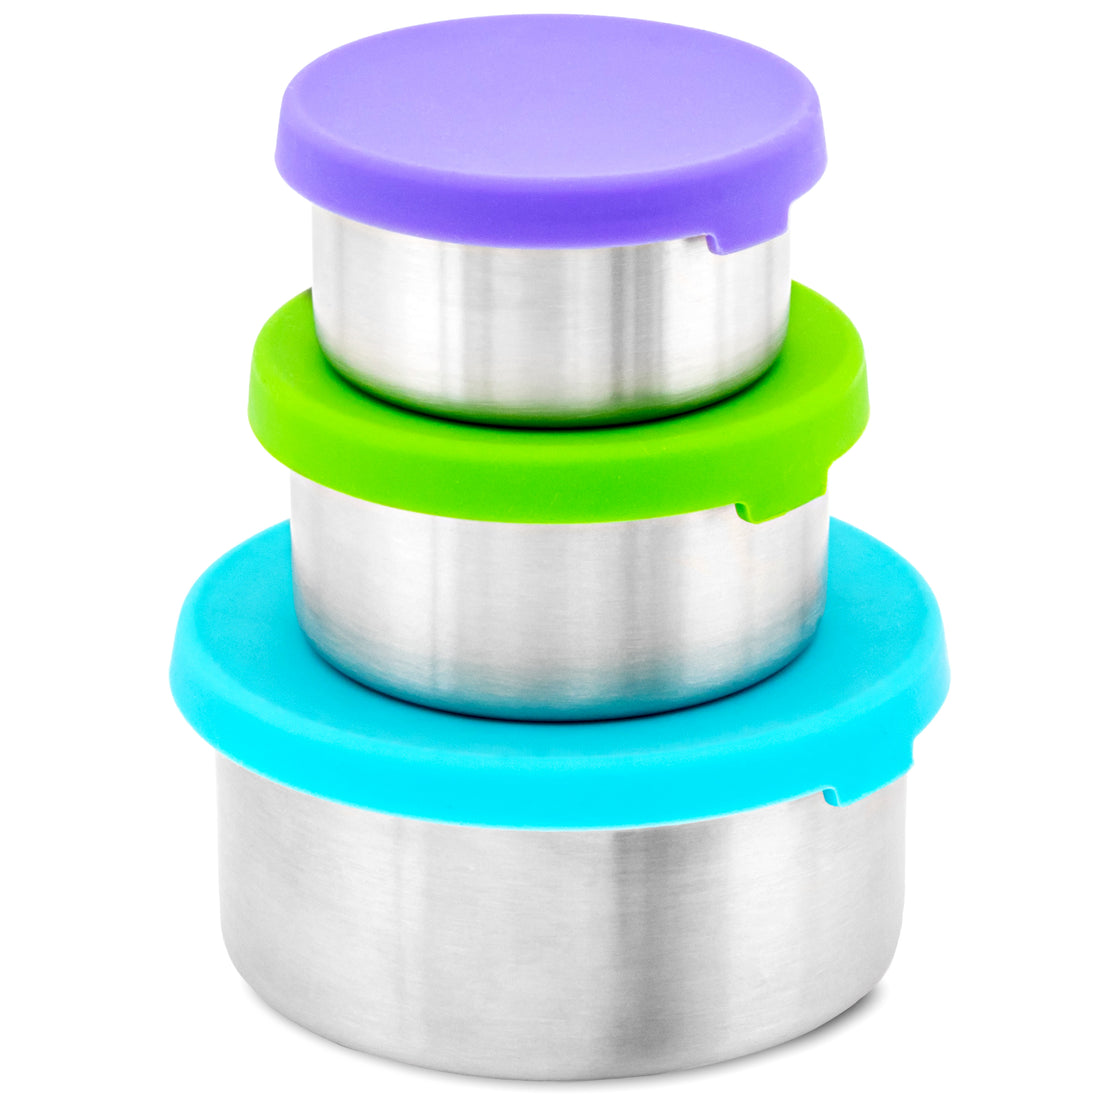 WeeSprout 18/8 Stainless Steel Food Containers | Leakproof | Set of 3, Blue